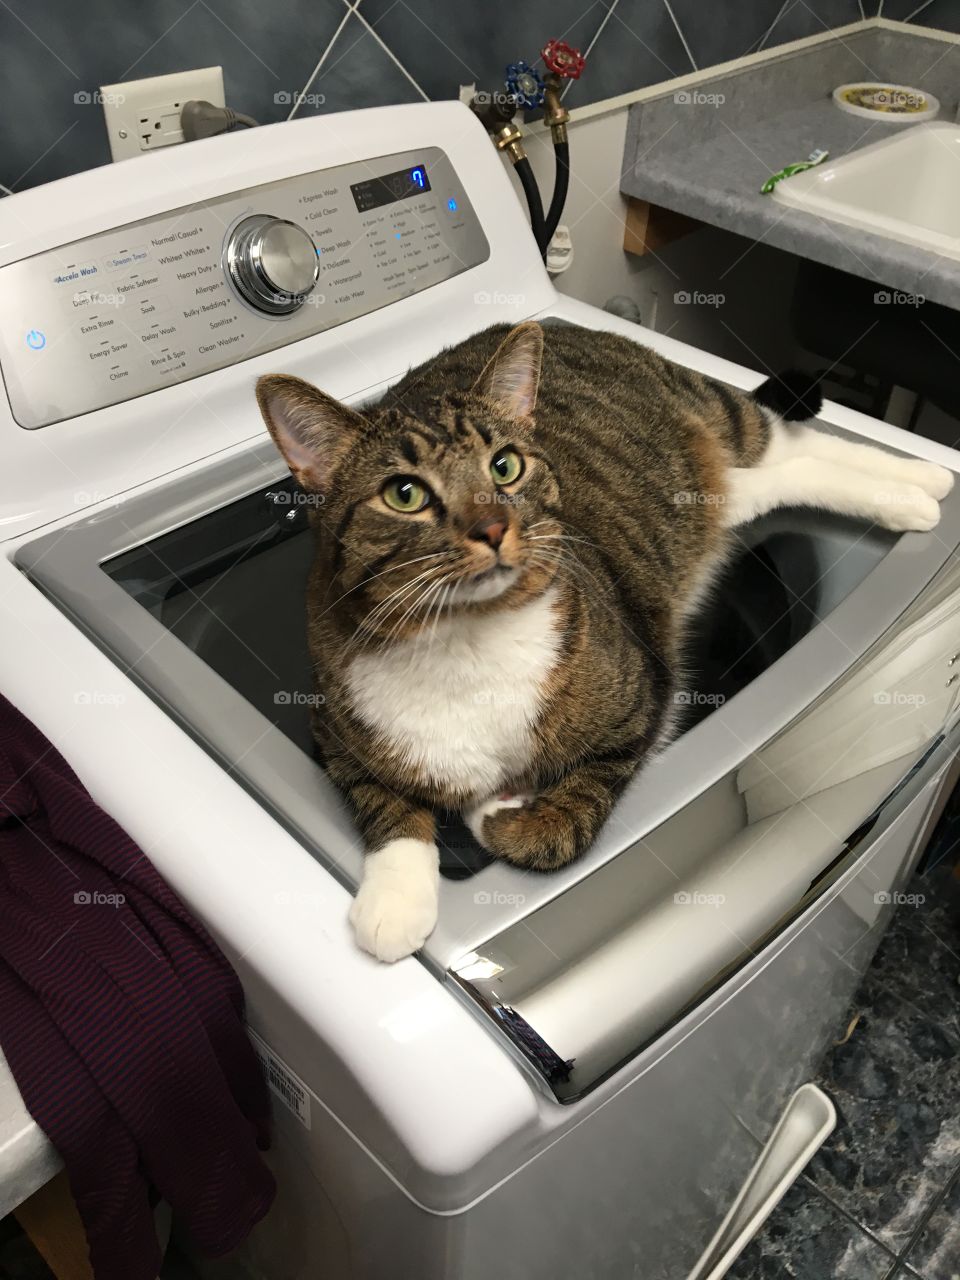 Orzo the cat, learning how to do laundry. He’s a mischievous little boy, but loves his parents so much and can never be apart from them. 